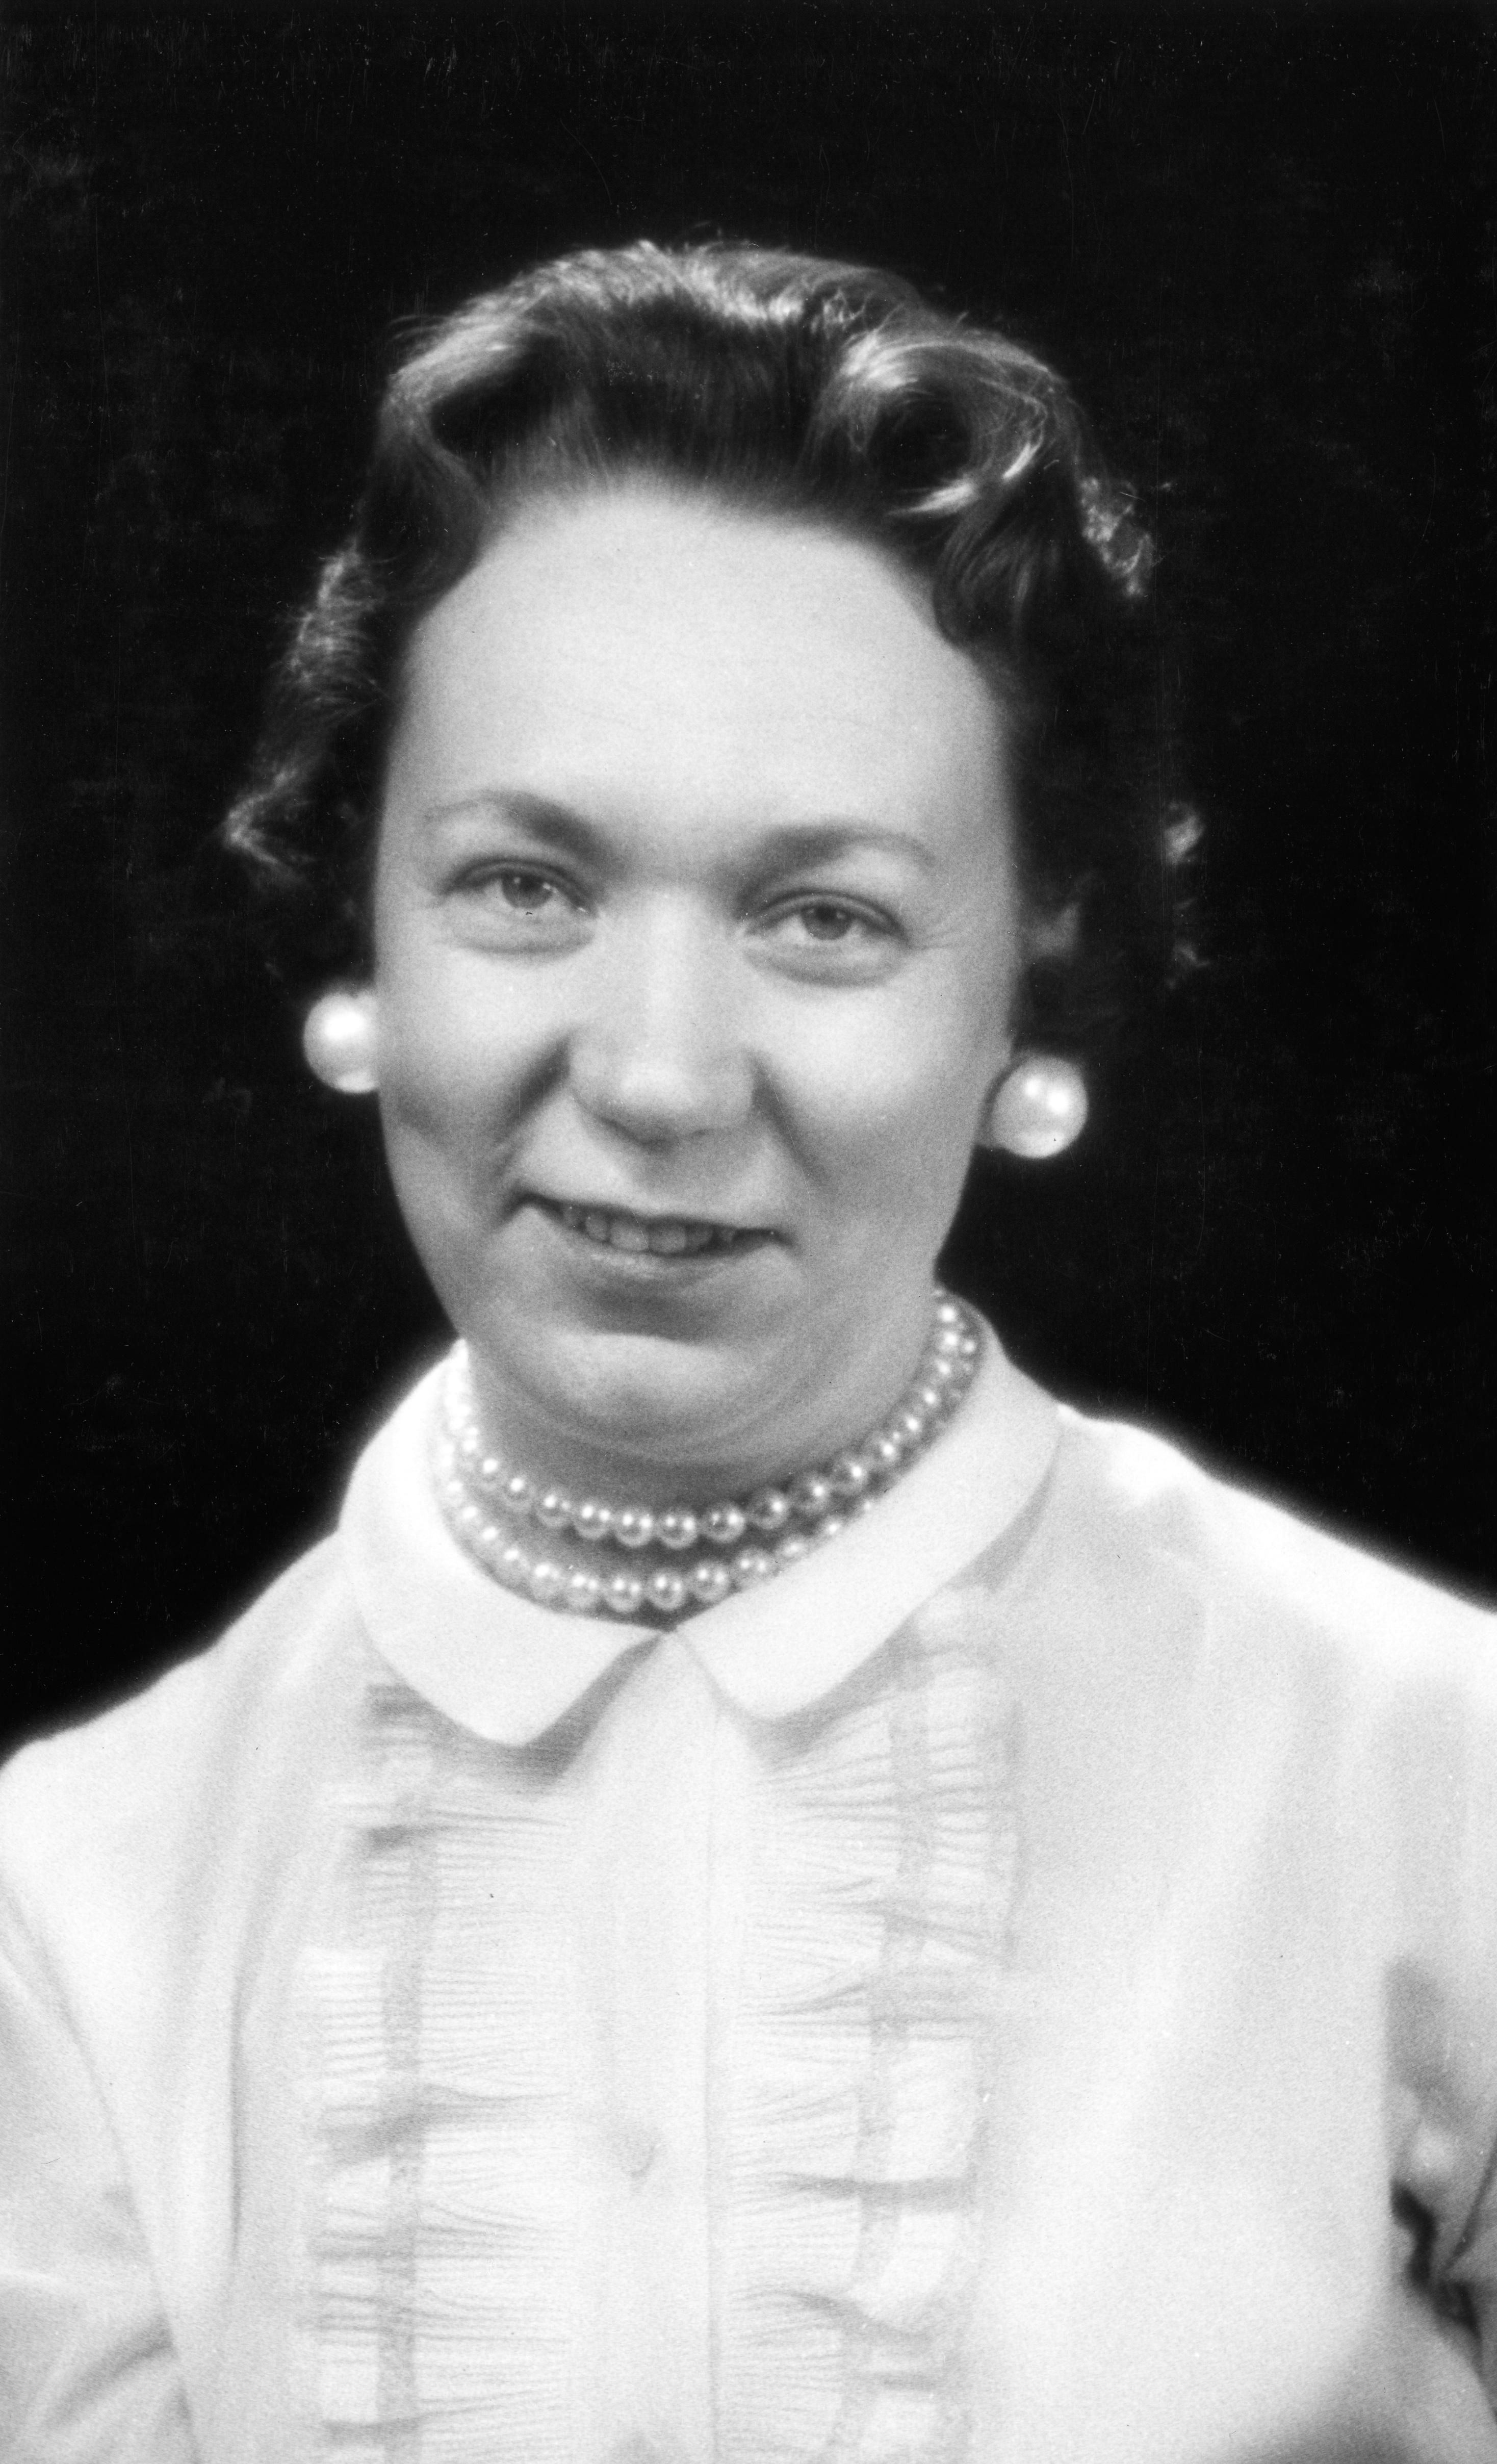 Professional photograph of Madge Crouch wearing a light shirt with a dark background